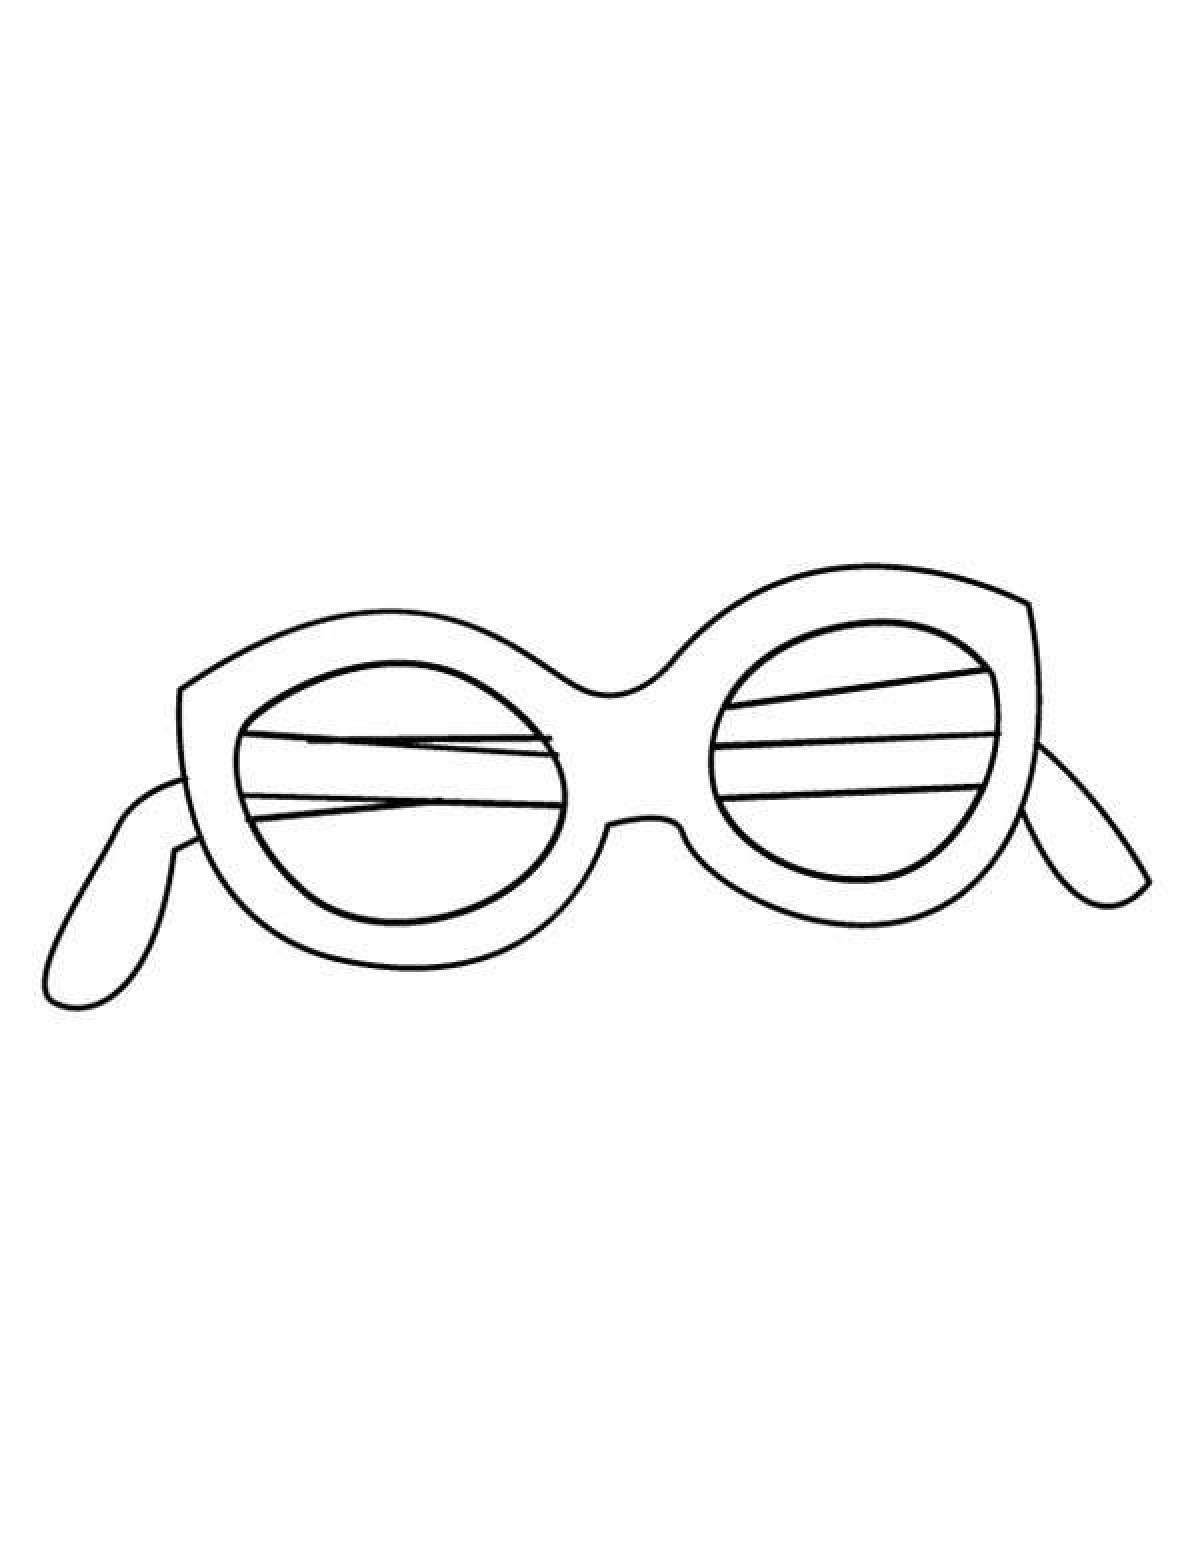 Shining glasses for coloring page